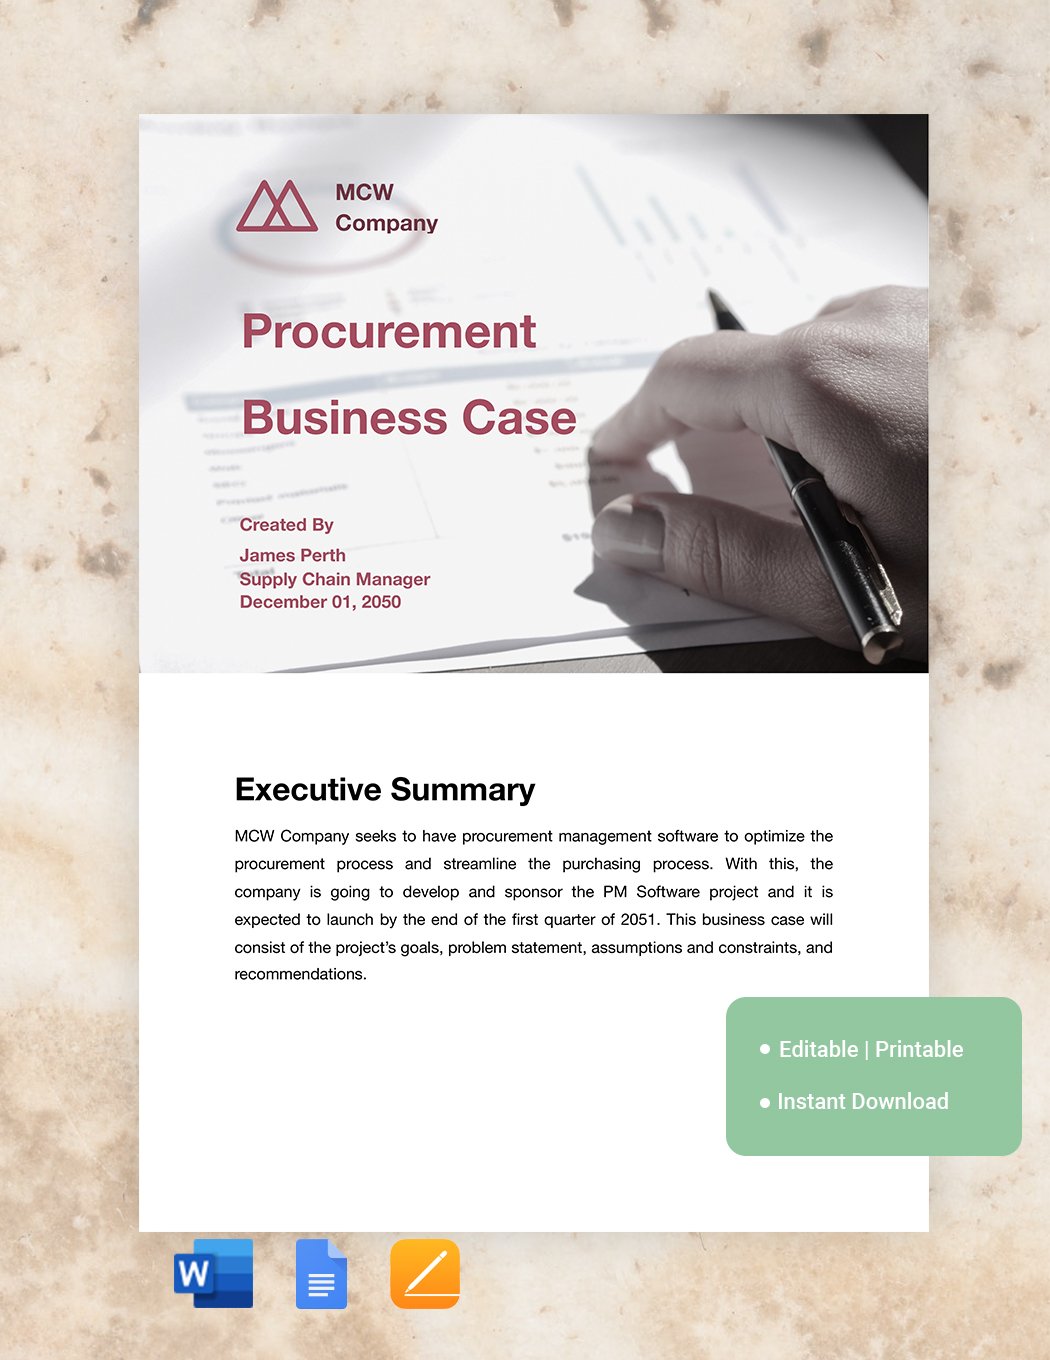 Free Procurement Business Case Template in Word, Google Docs, Apple Pages